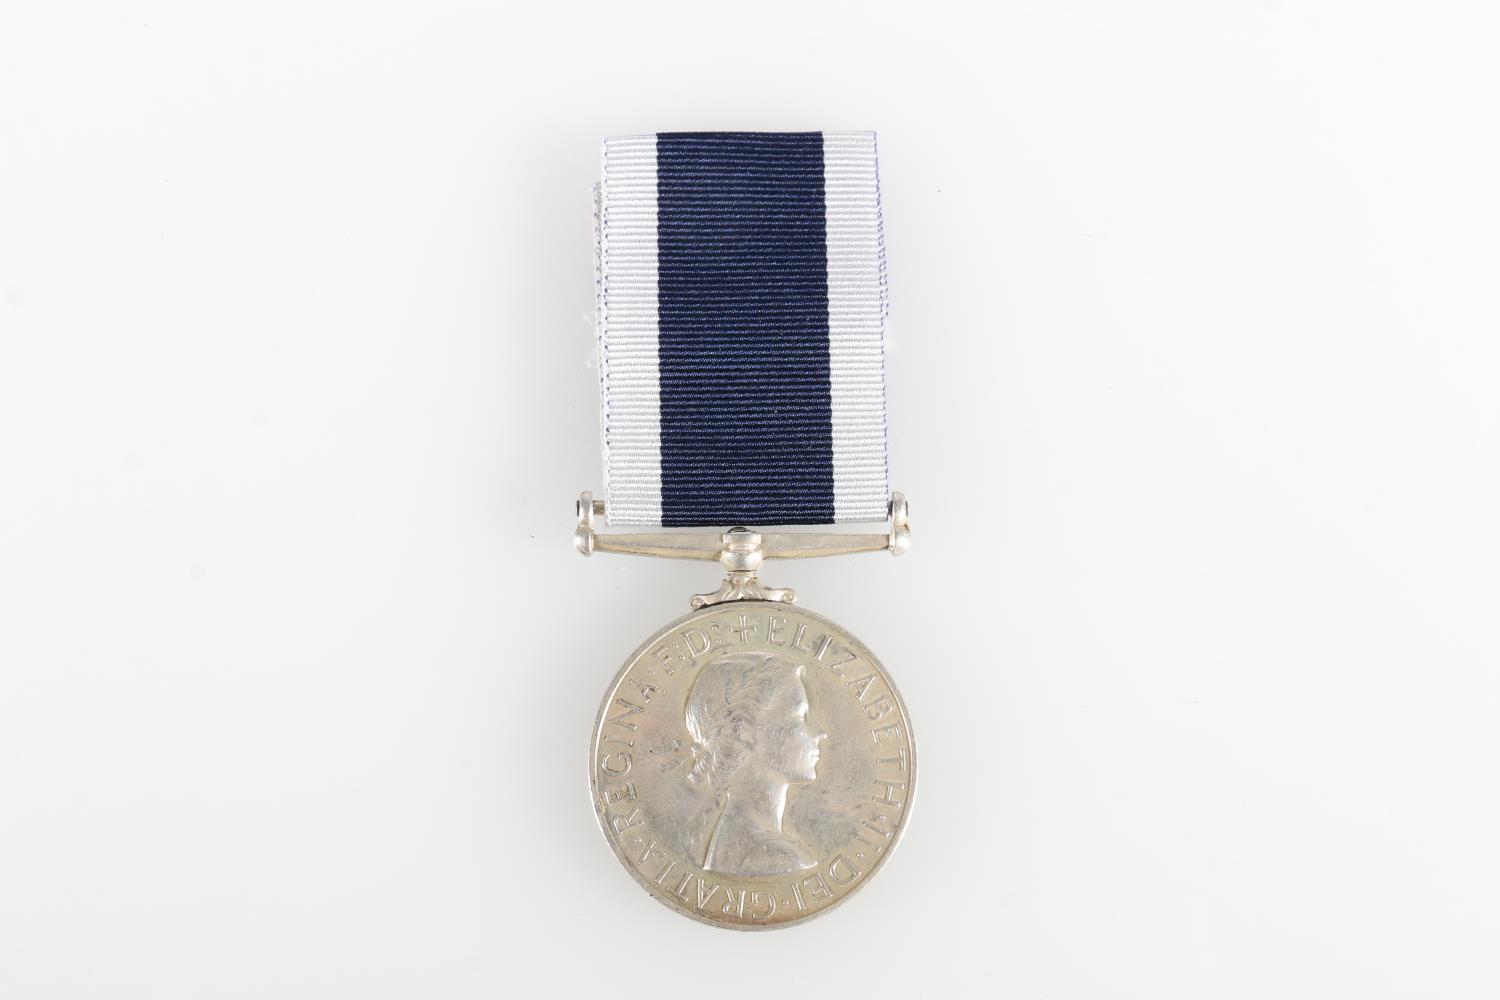 Medal of K937550 Mechanician 1st Class H G Thain of the Royal Navy comprising Elizabeth II (DEI